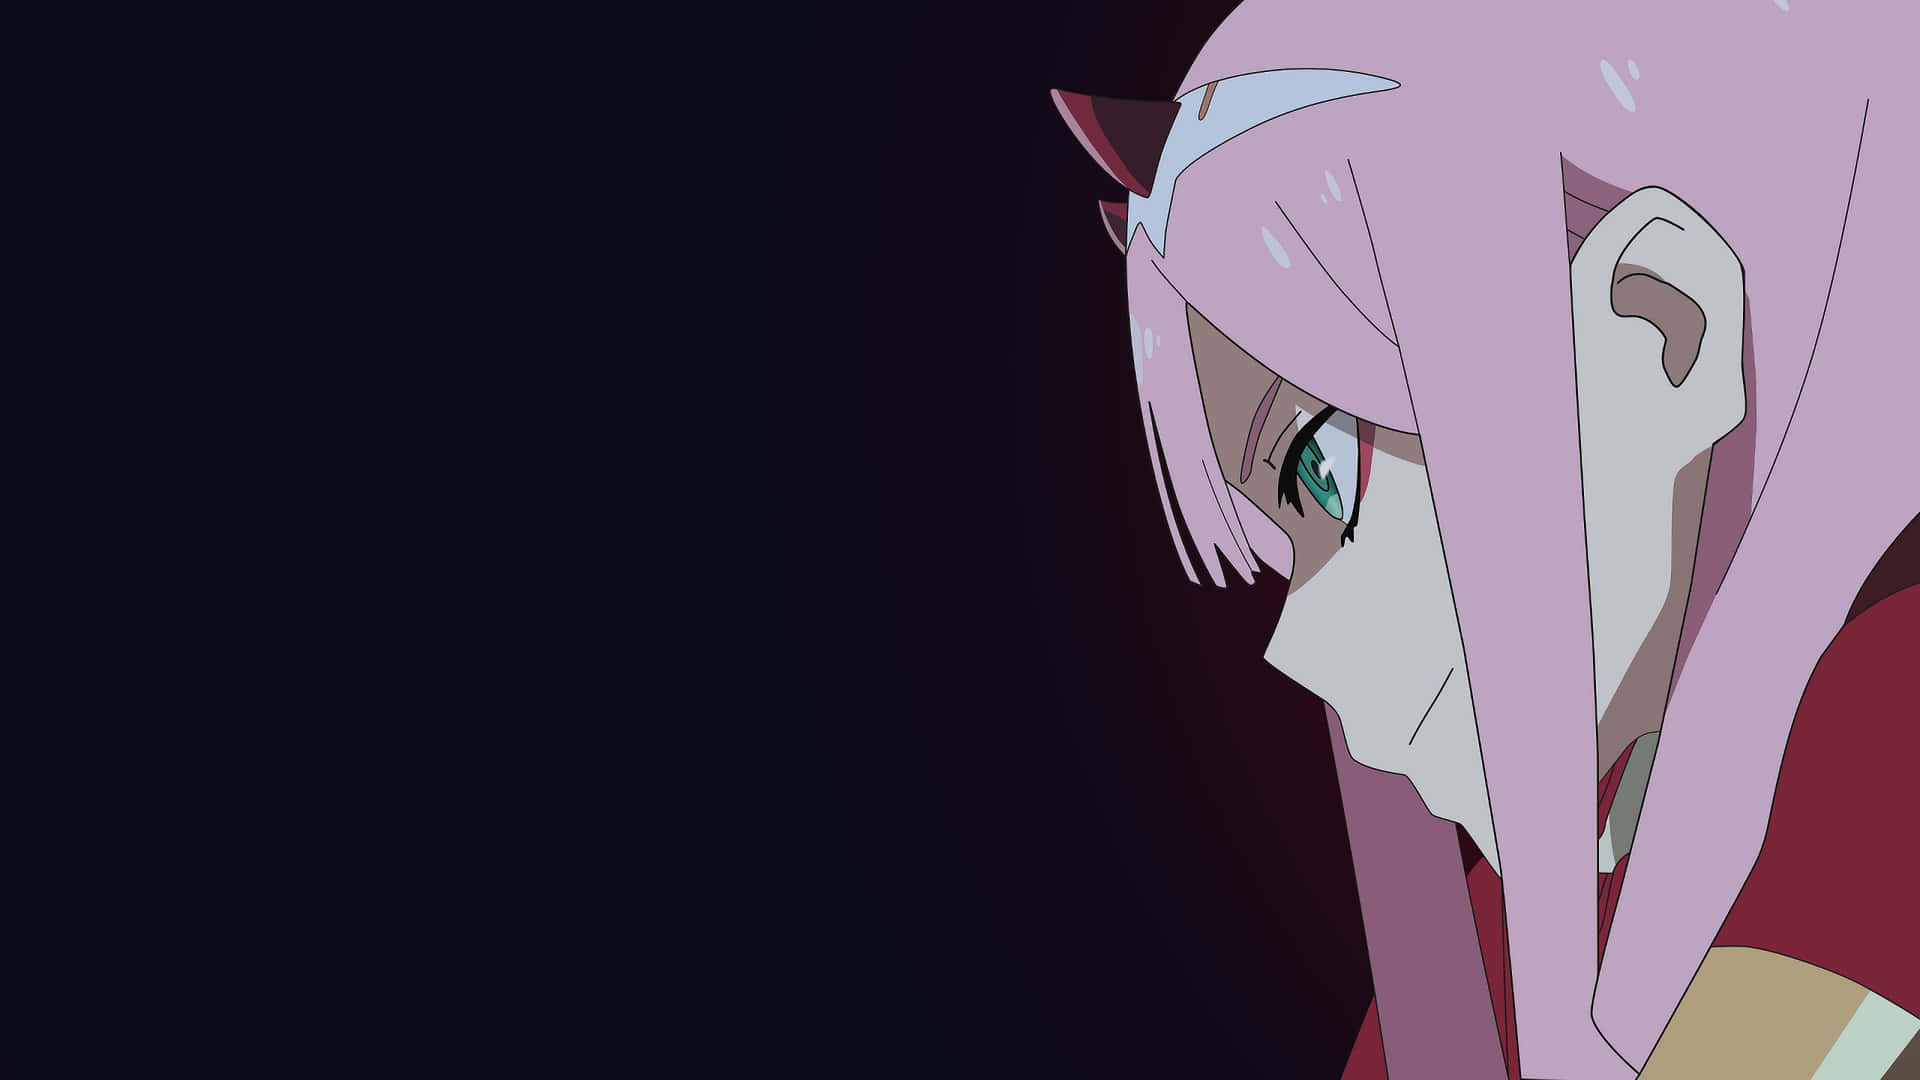 "A heroic duo of Zero Two and Hiro fighting as a team in Darling in The Franxx"